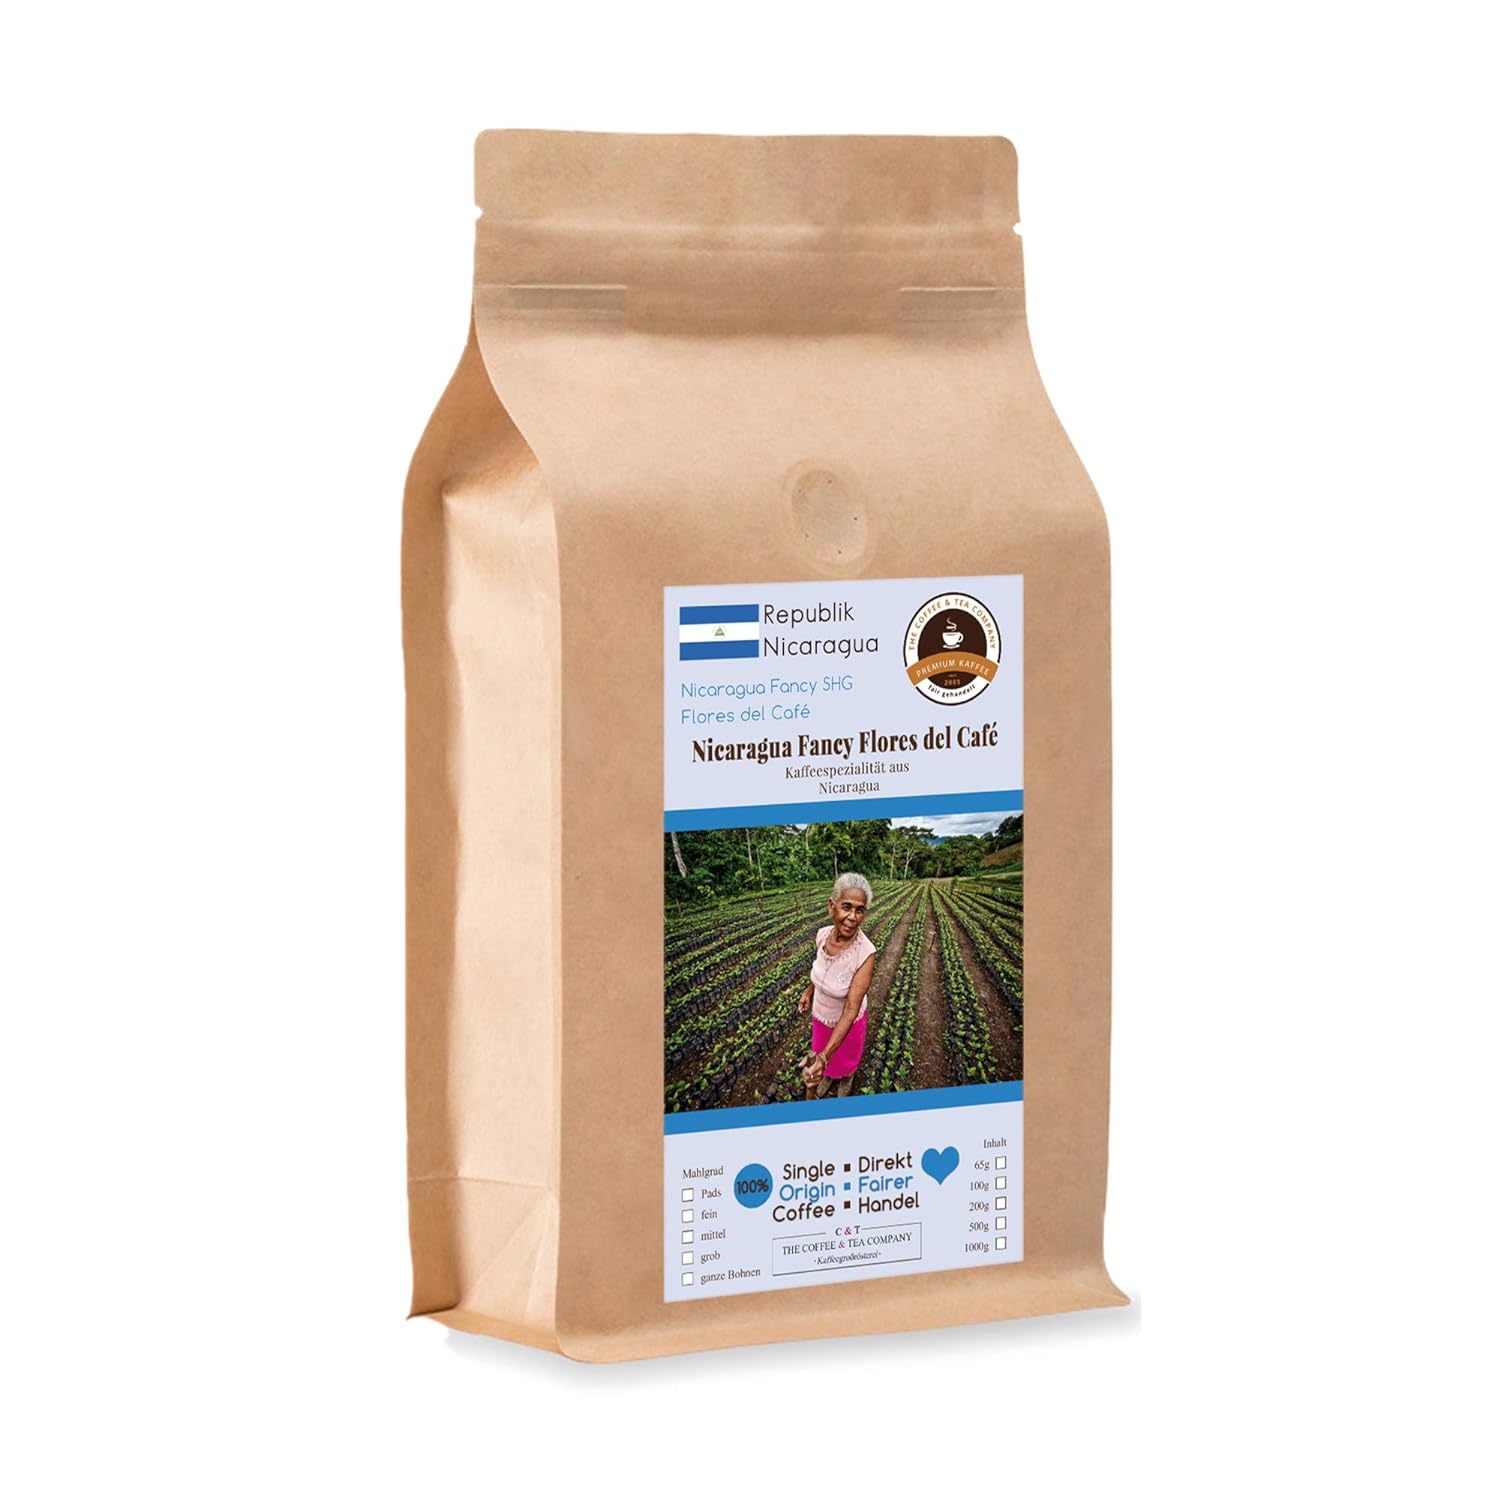 Coffee Globetrotter - Coffee with Heart - Nicaragua Fancy Flores del Café - 1000 g Medium Ground - Top Coffee from the Women\'s Fund Project Fair Traded Supports Social Projects